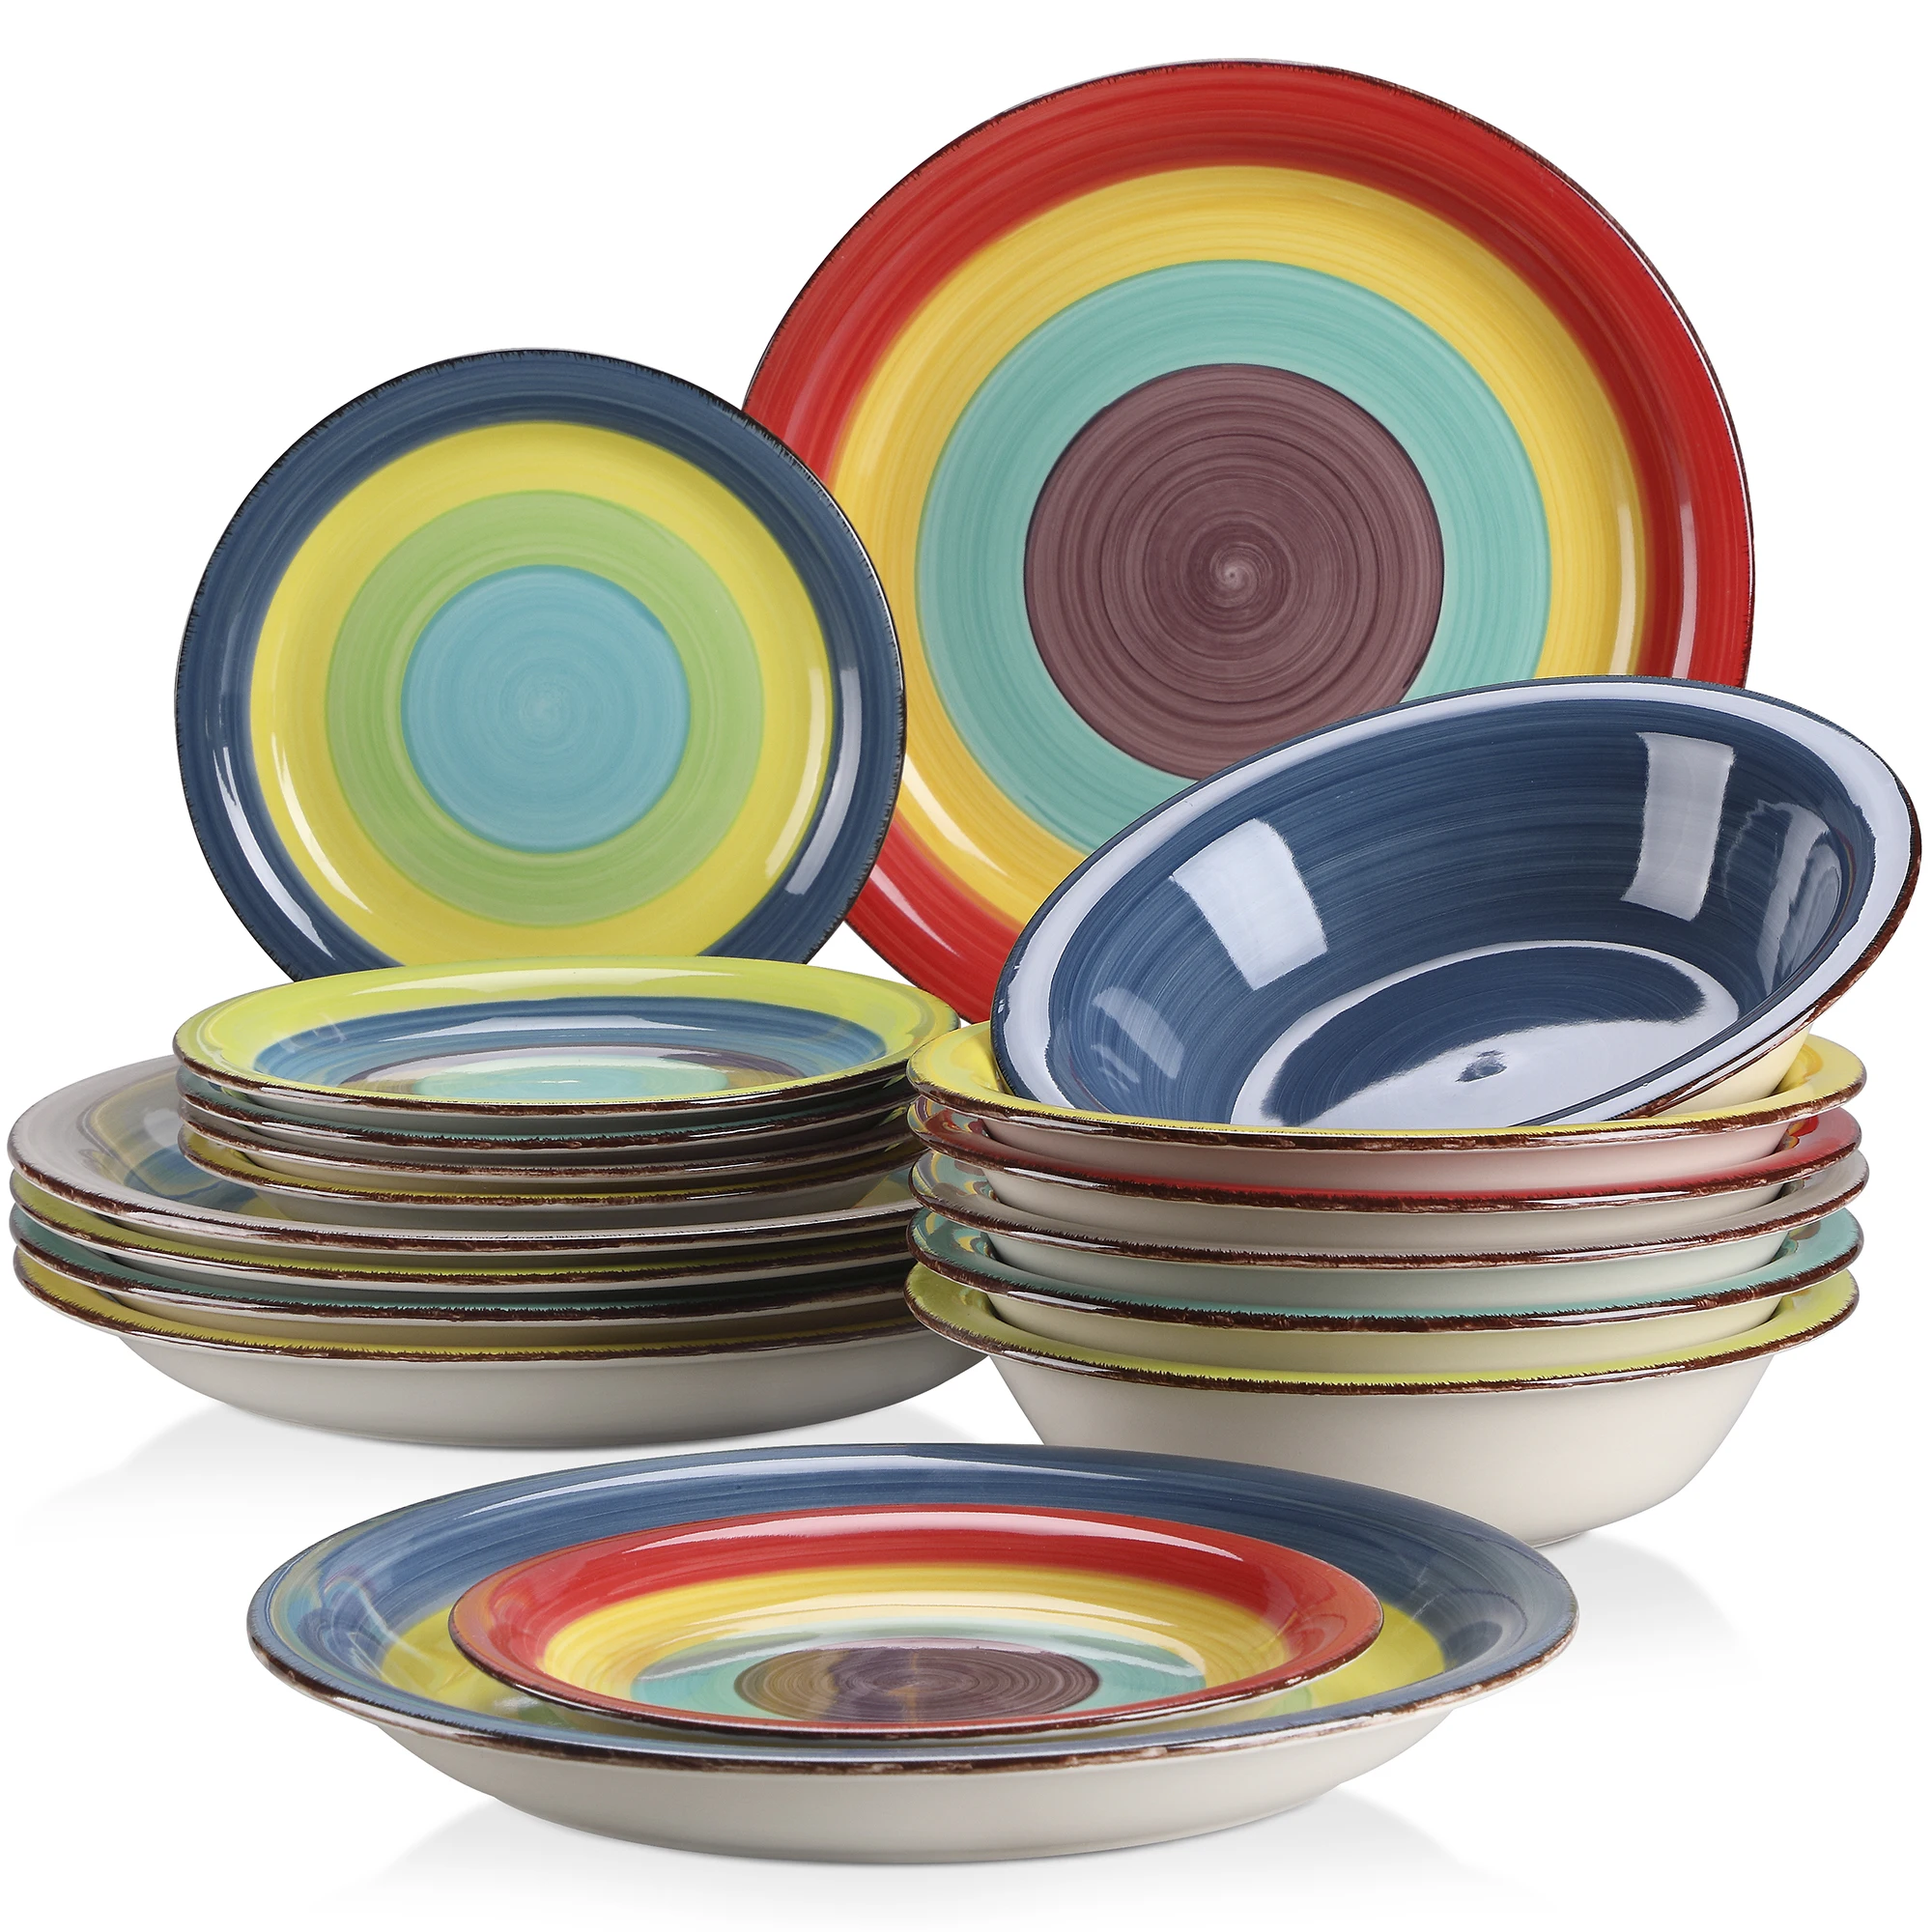 New Vancasso Arco 18-Piece Ceramic Tableware Set Handpainted Spiral and Alternately Colourful Pattern Stoneware Dinner Set for 6